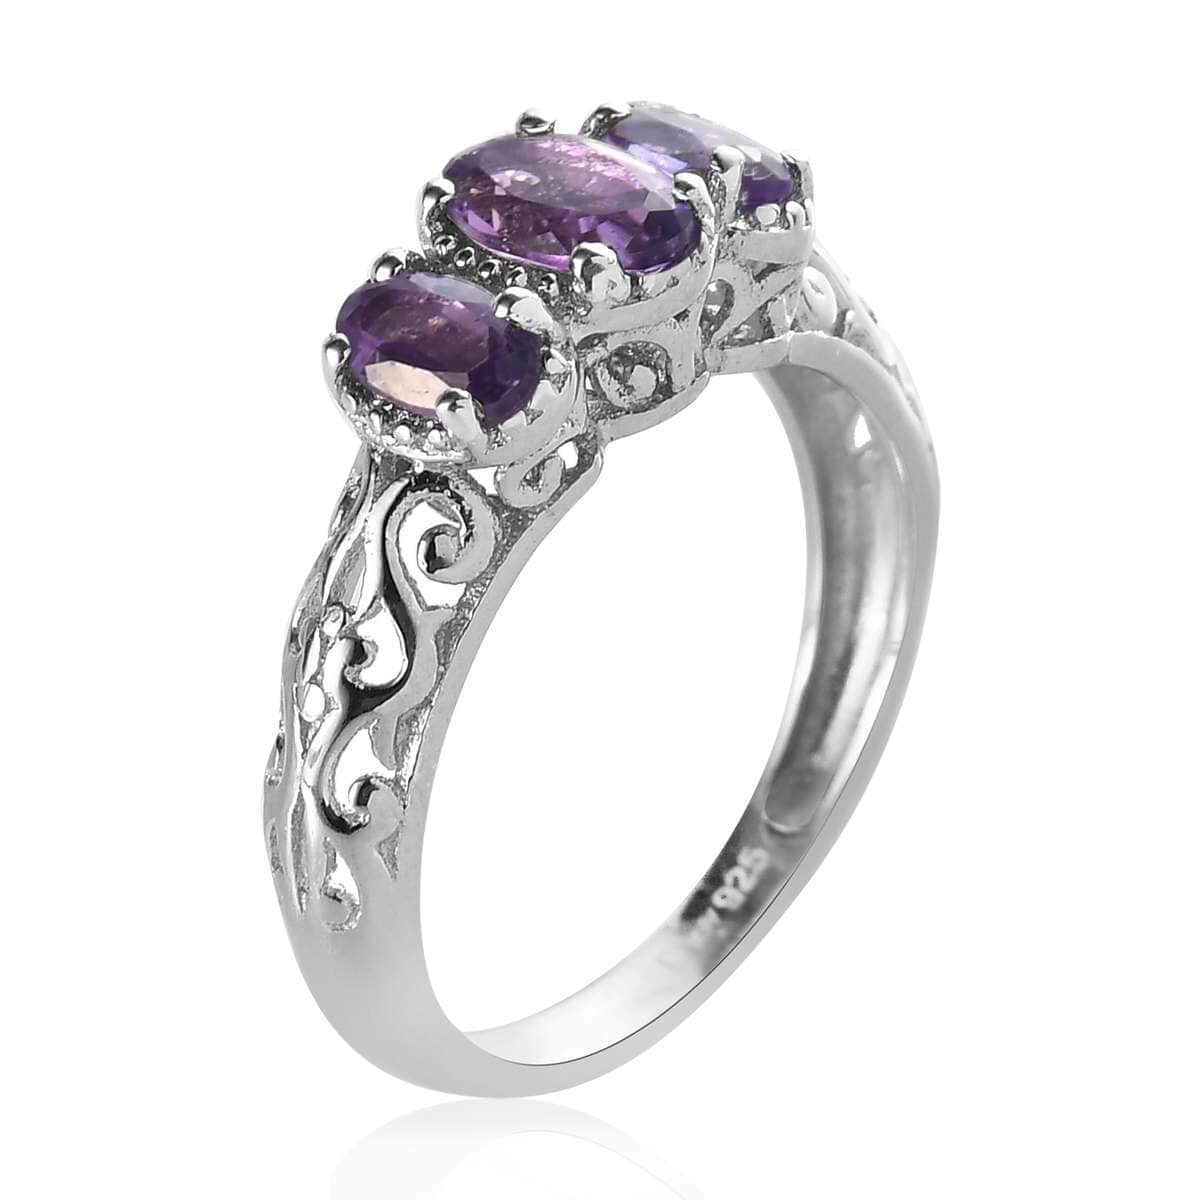 Amethyst Ring, 3 Stone Amethyst Ring, Trilogy Ring, Sterling Silver Ring, Birthstone Jewelry, Amethyst 3 Stone Ring 0.85 ctw image number 6